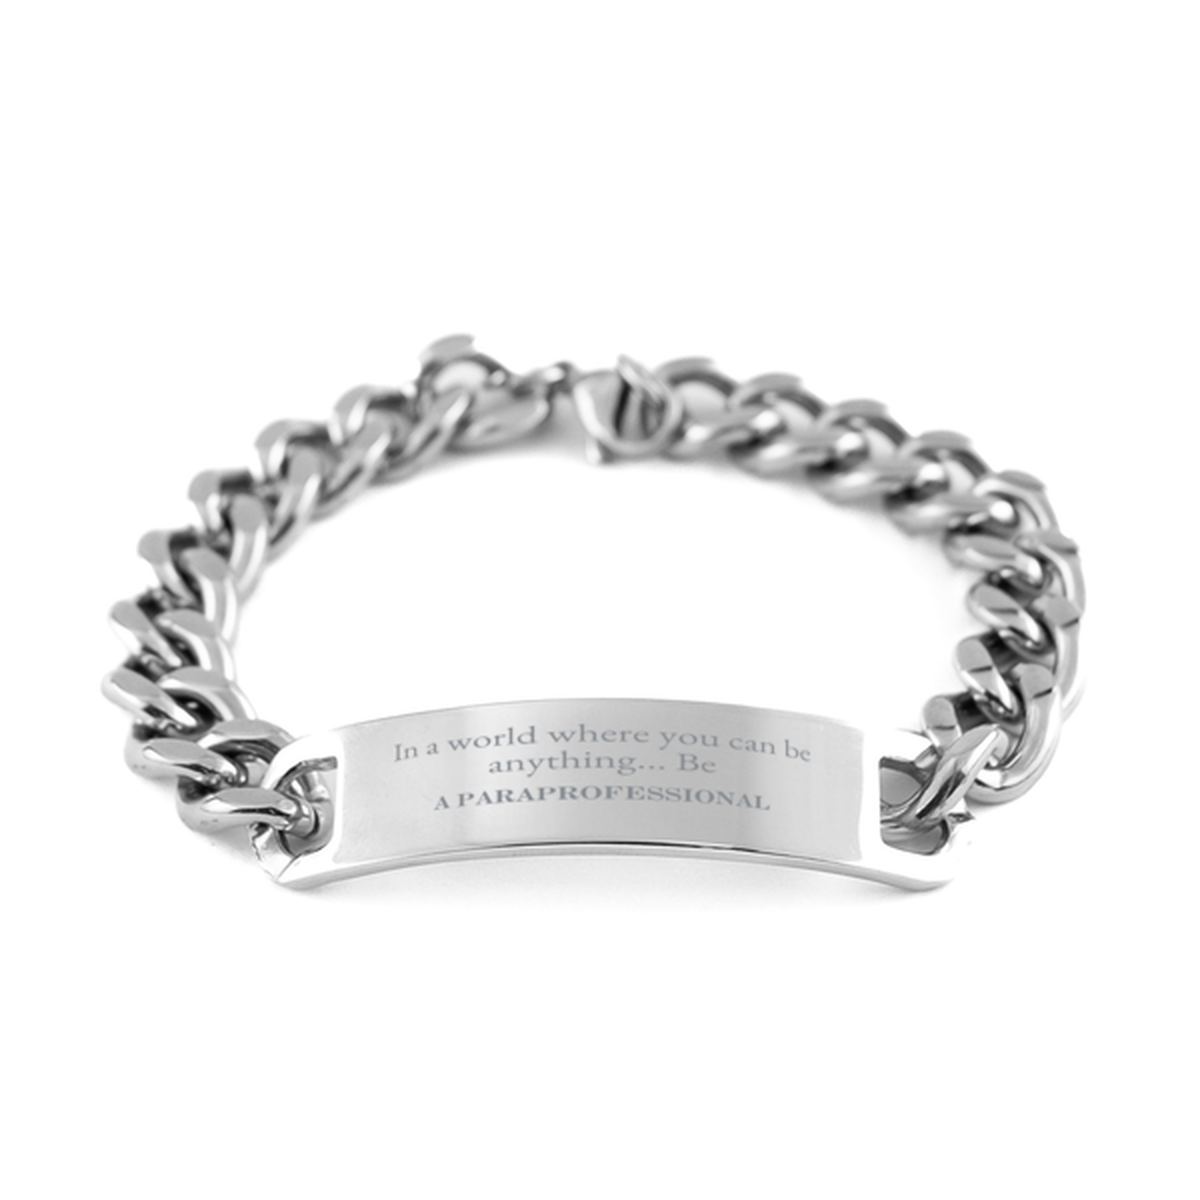 Gifts for Paraprofessional, In a world where you can be anything, Appreciation Birthday Cuban Chain Stainless Steel Bracelet for Men, Women, Friends, Coworkers